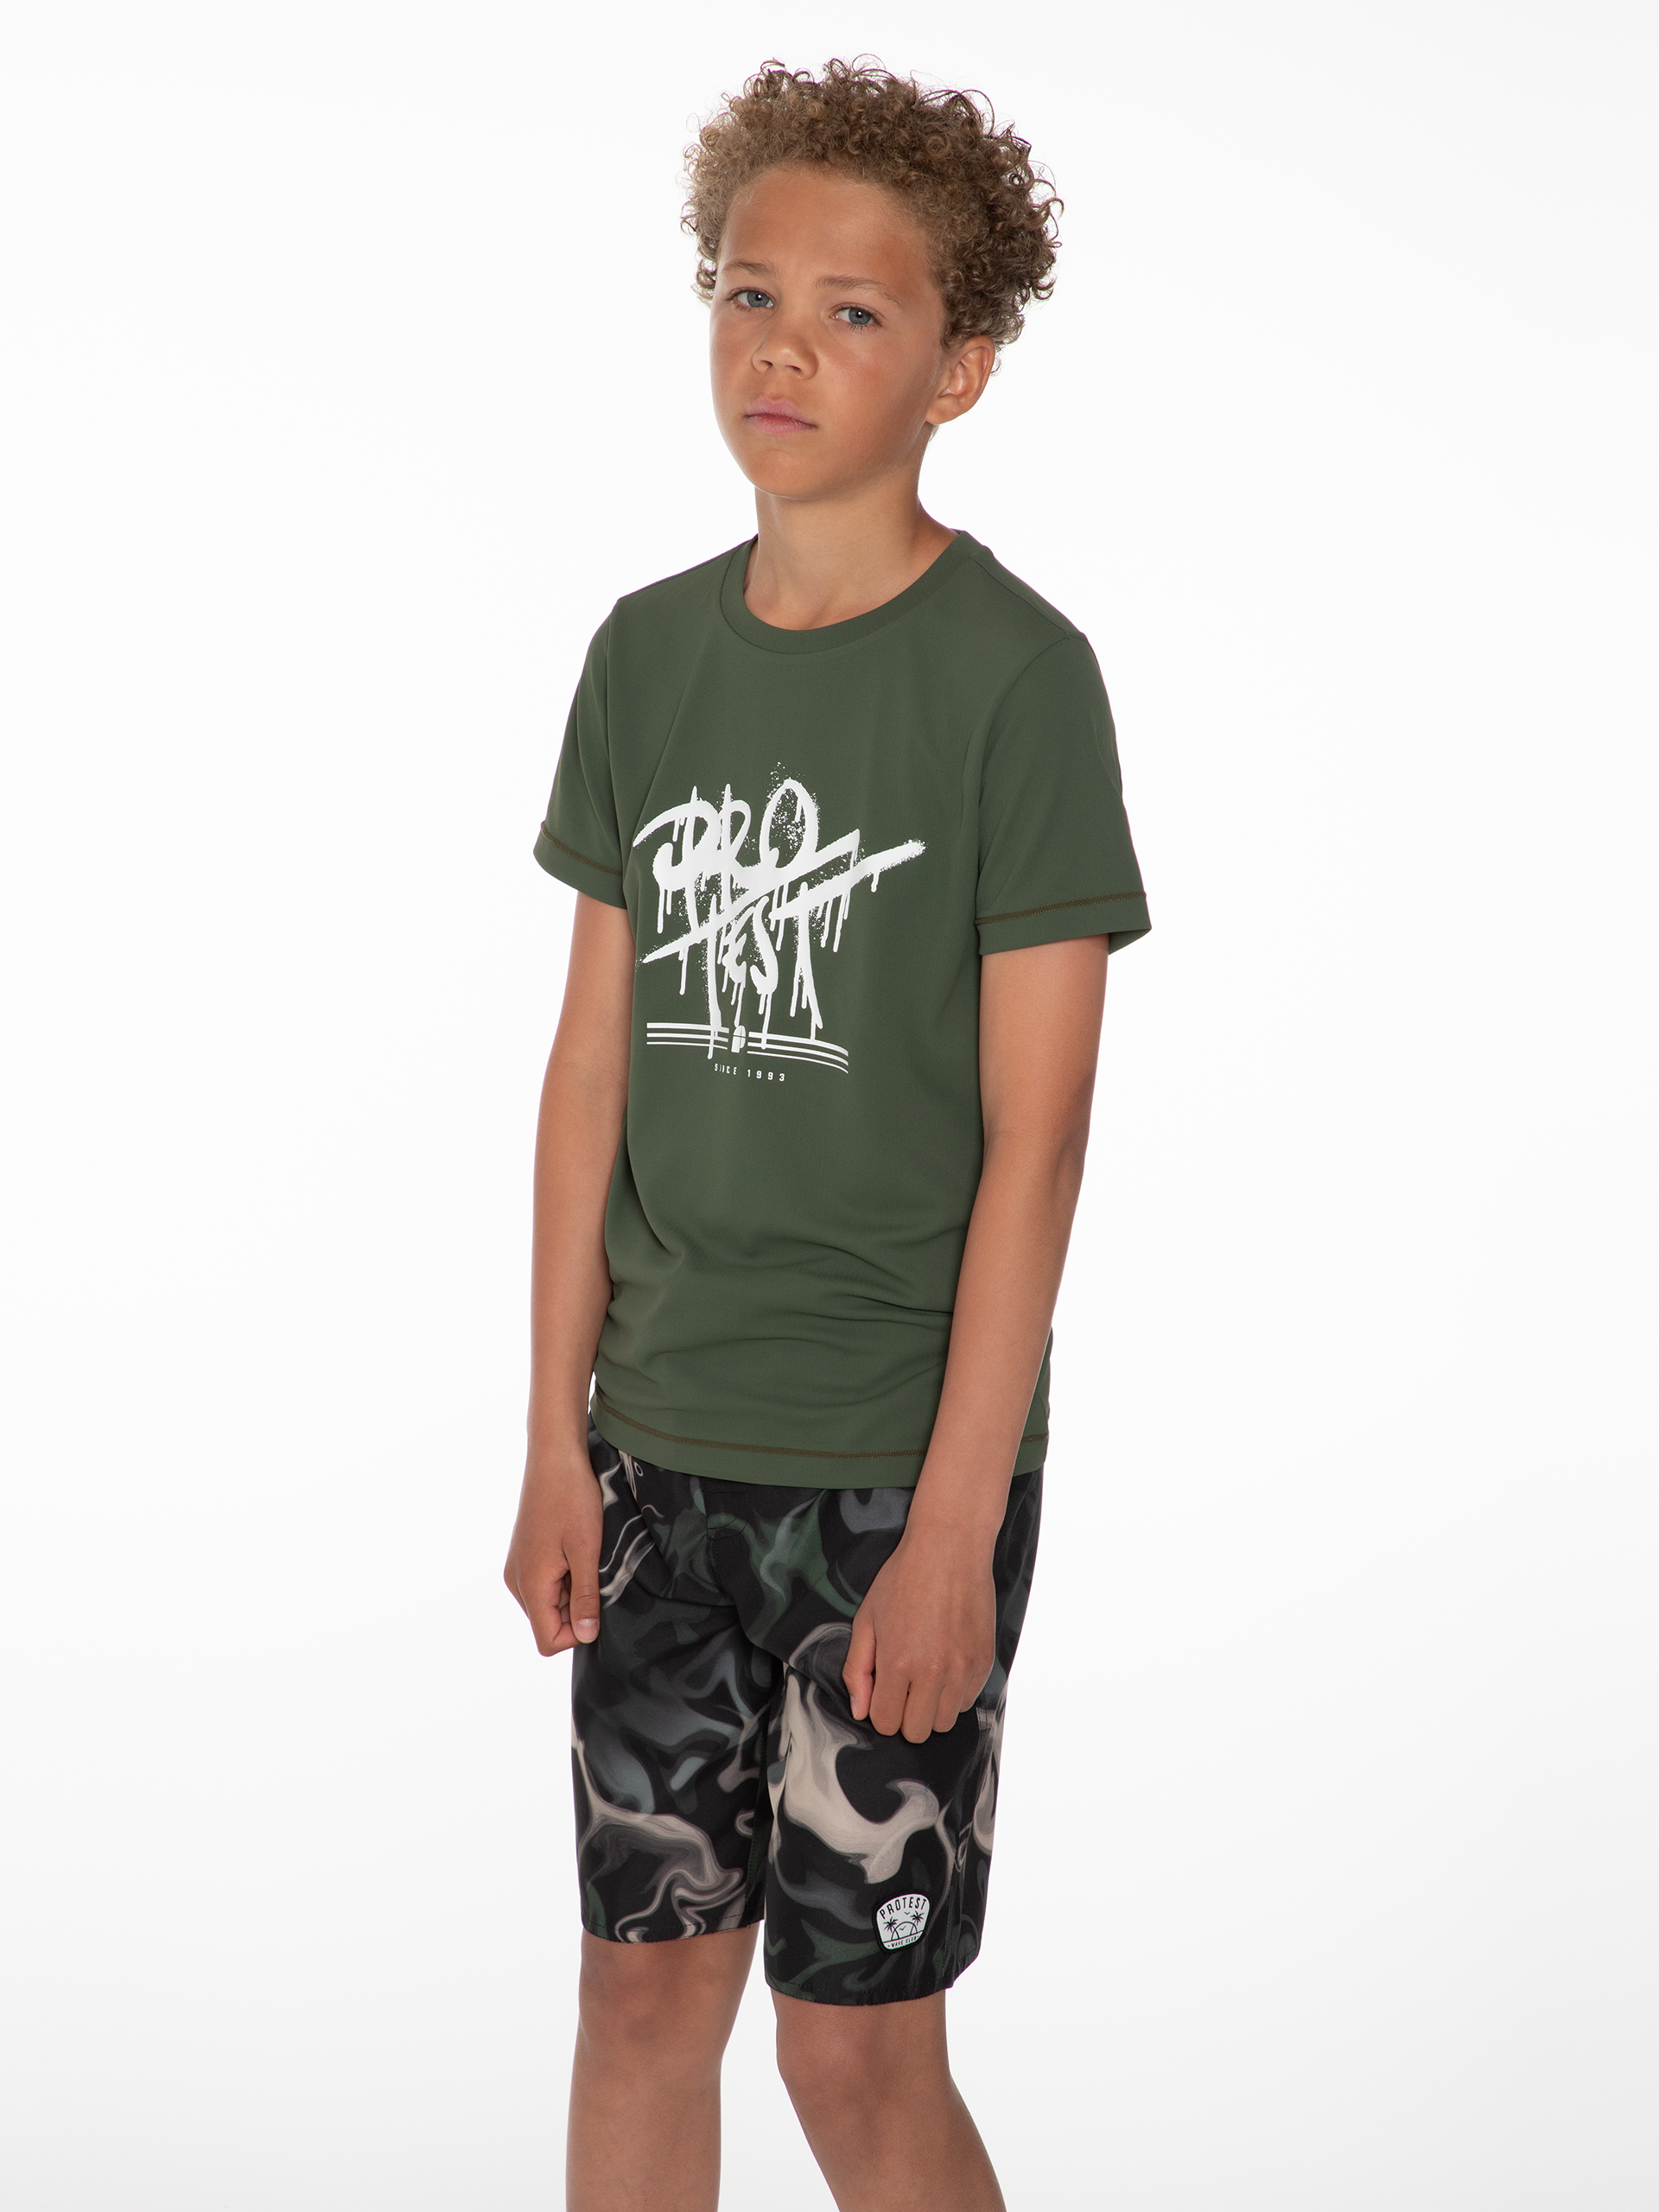 Protest Hyde jr Surf T-shirt Spruce | PROTEST States